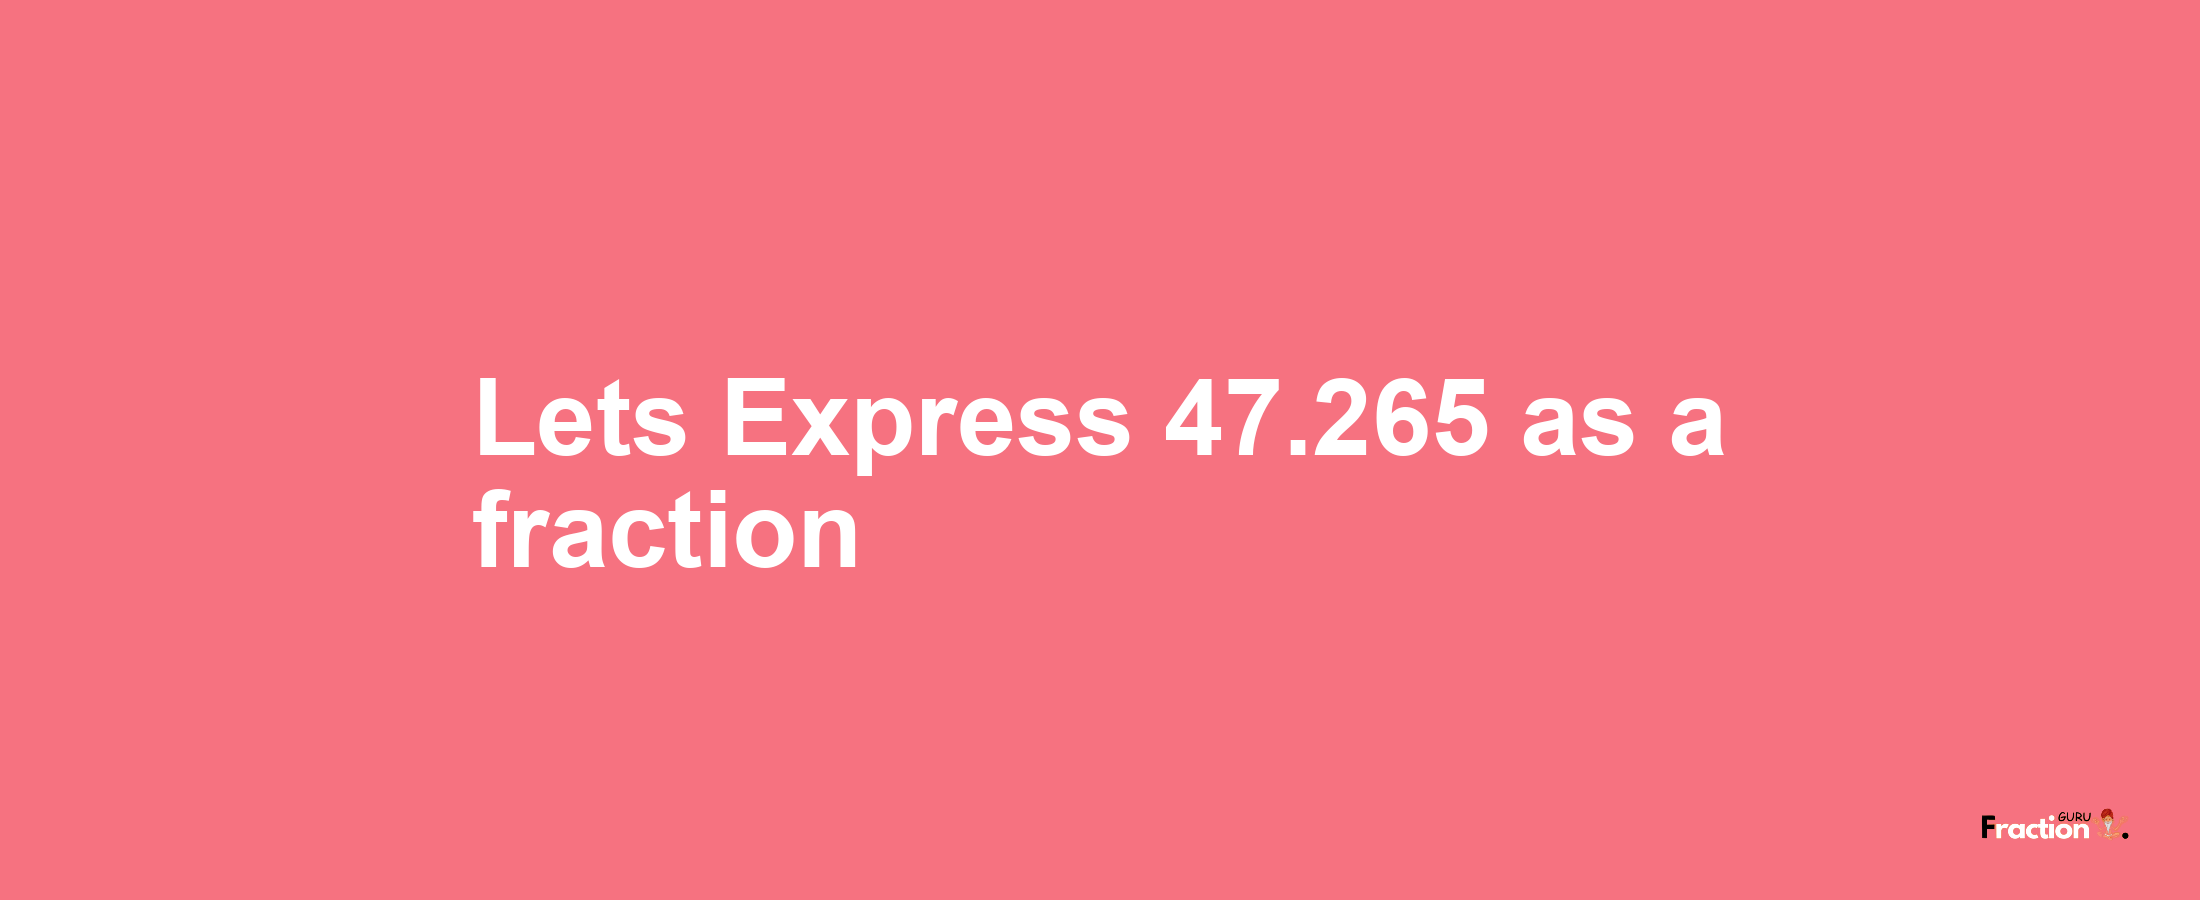 Lets Express 47.265 as afraction